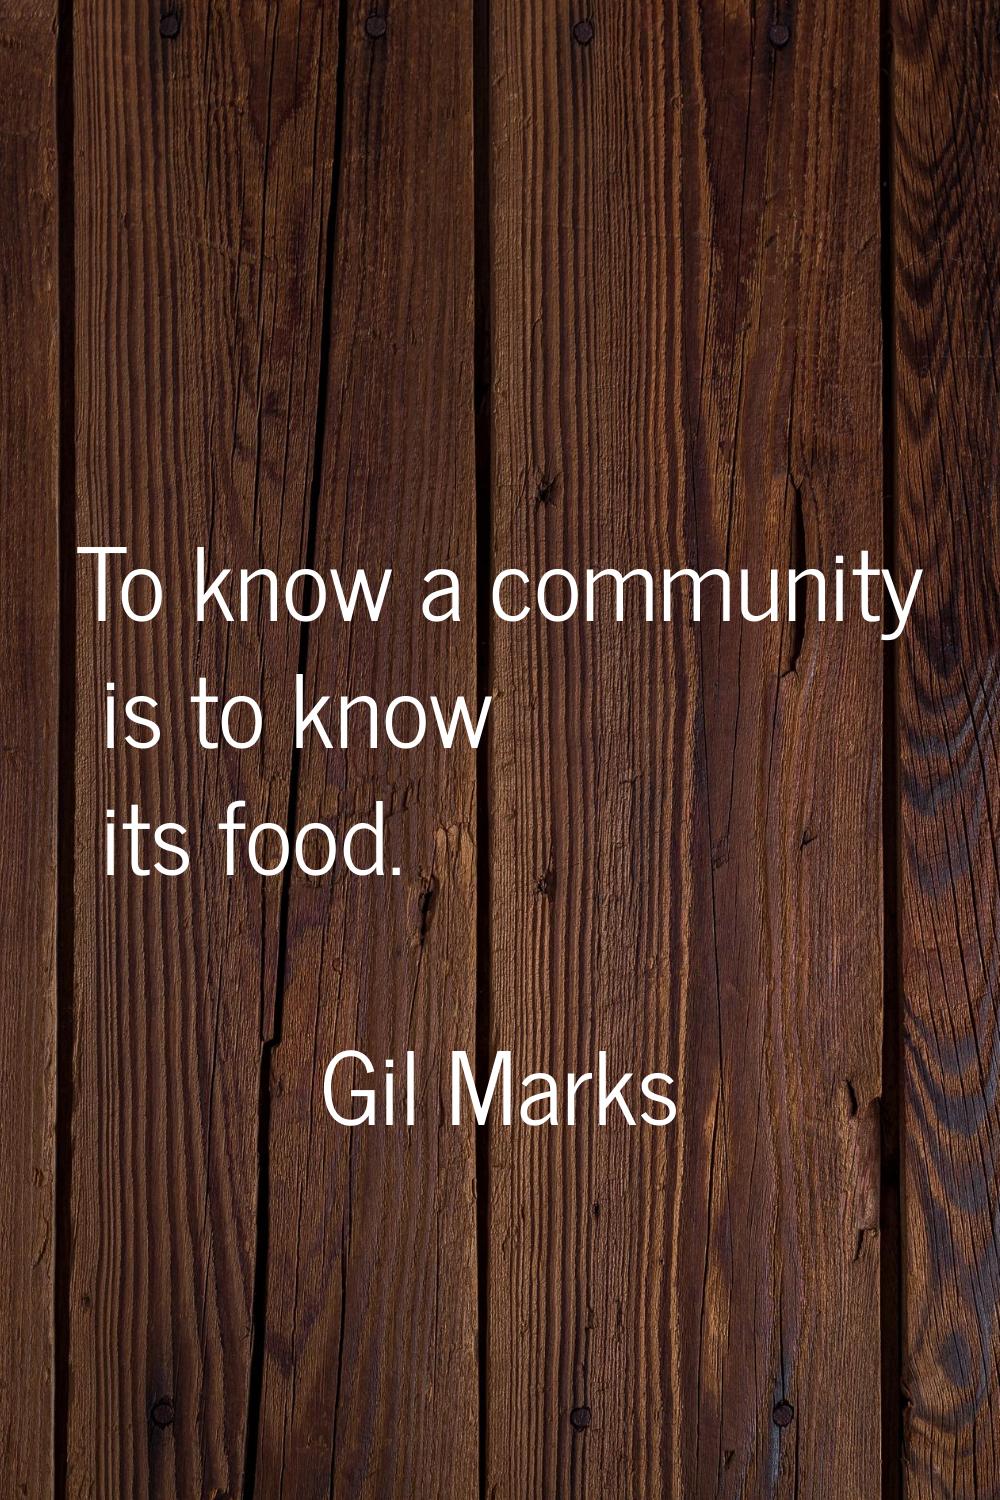 To know a community is to know its food.